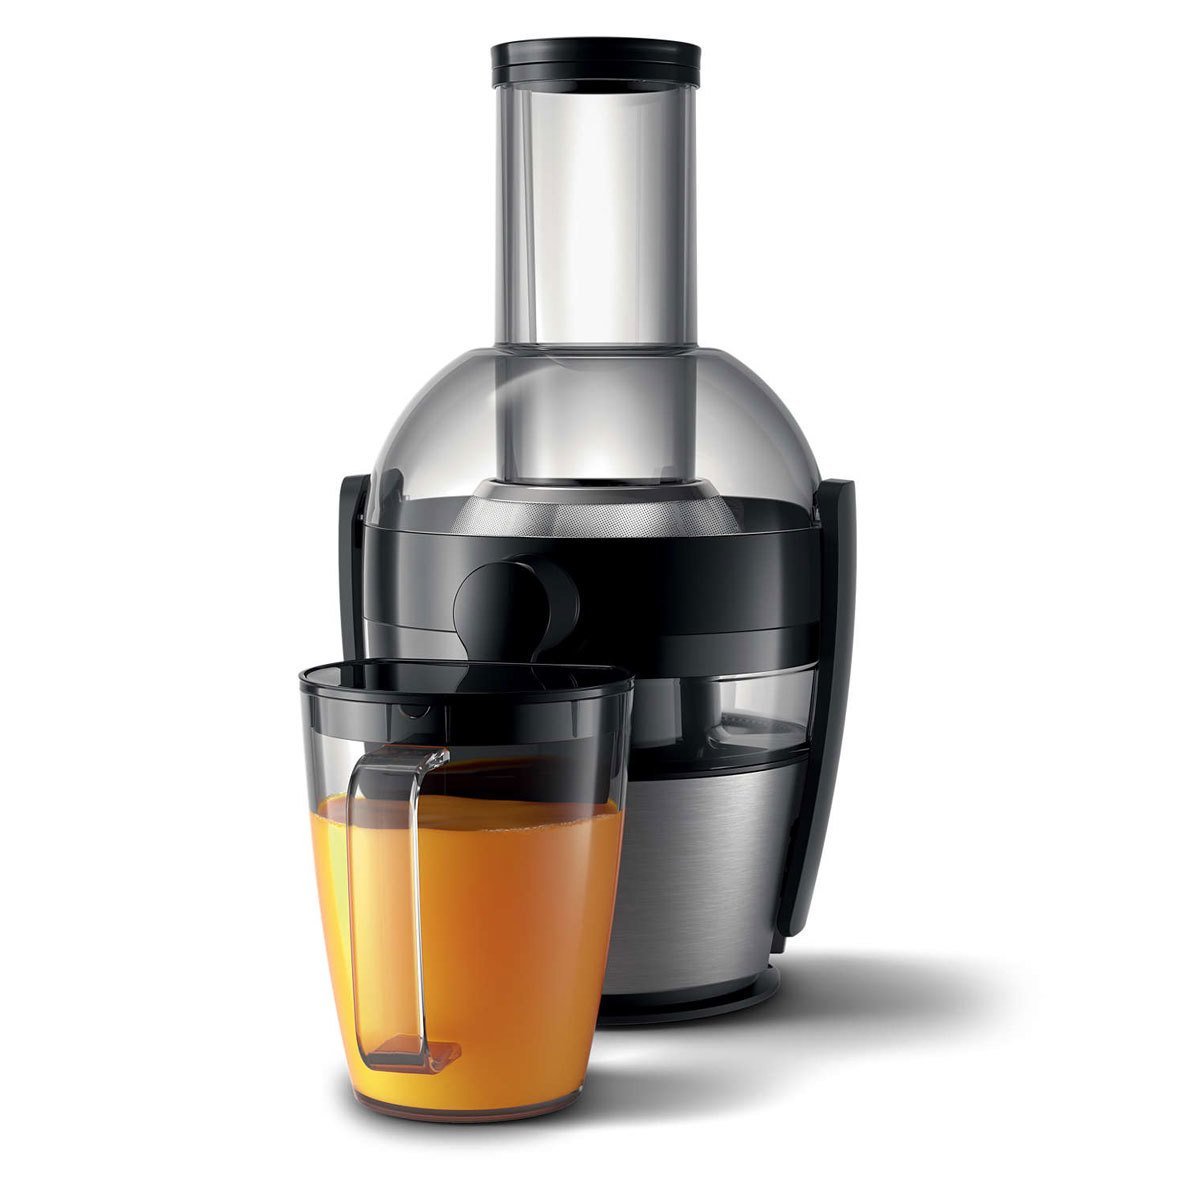 Philips Viva Collection Compact Juicer HR1836/01 - Signature Retail Stores